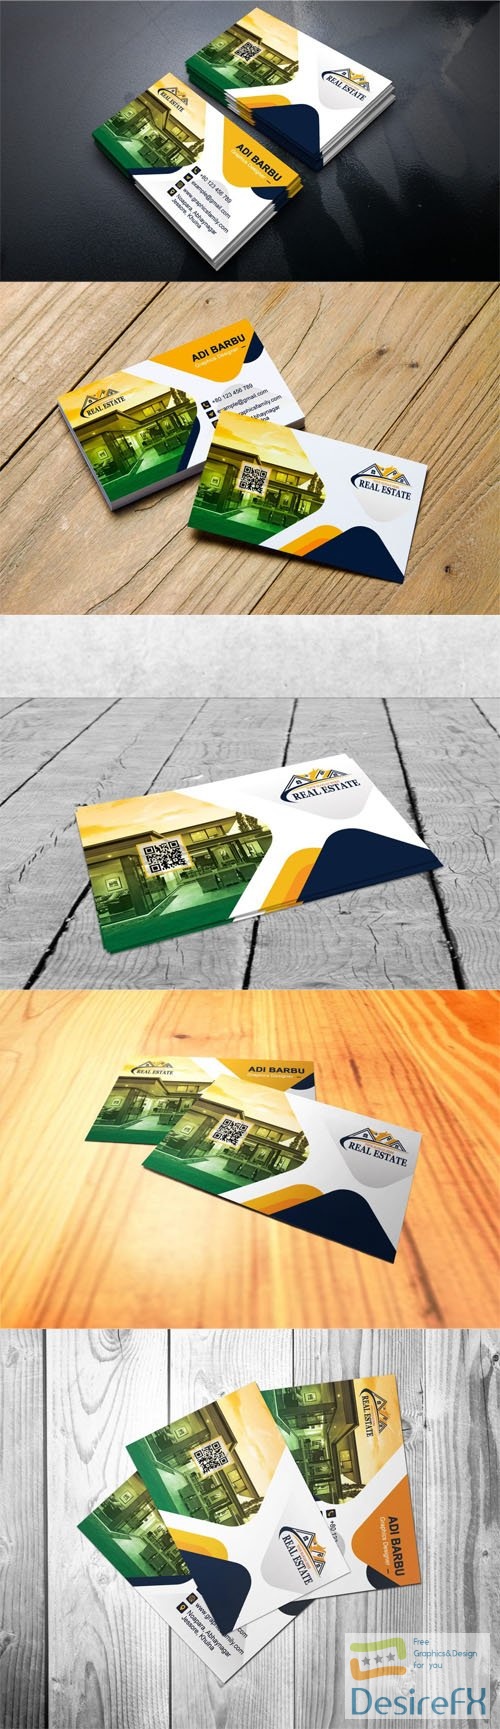 Real Estate Agent Business Card - PSD Templates